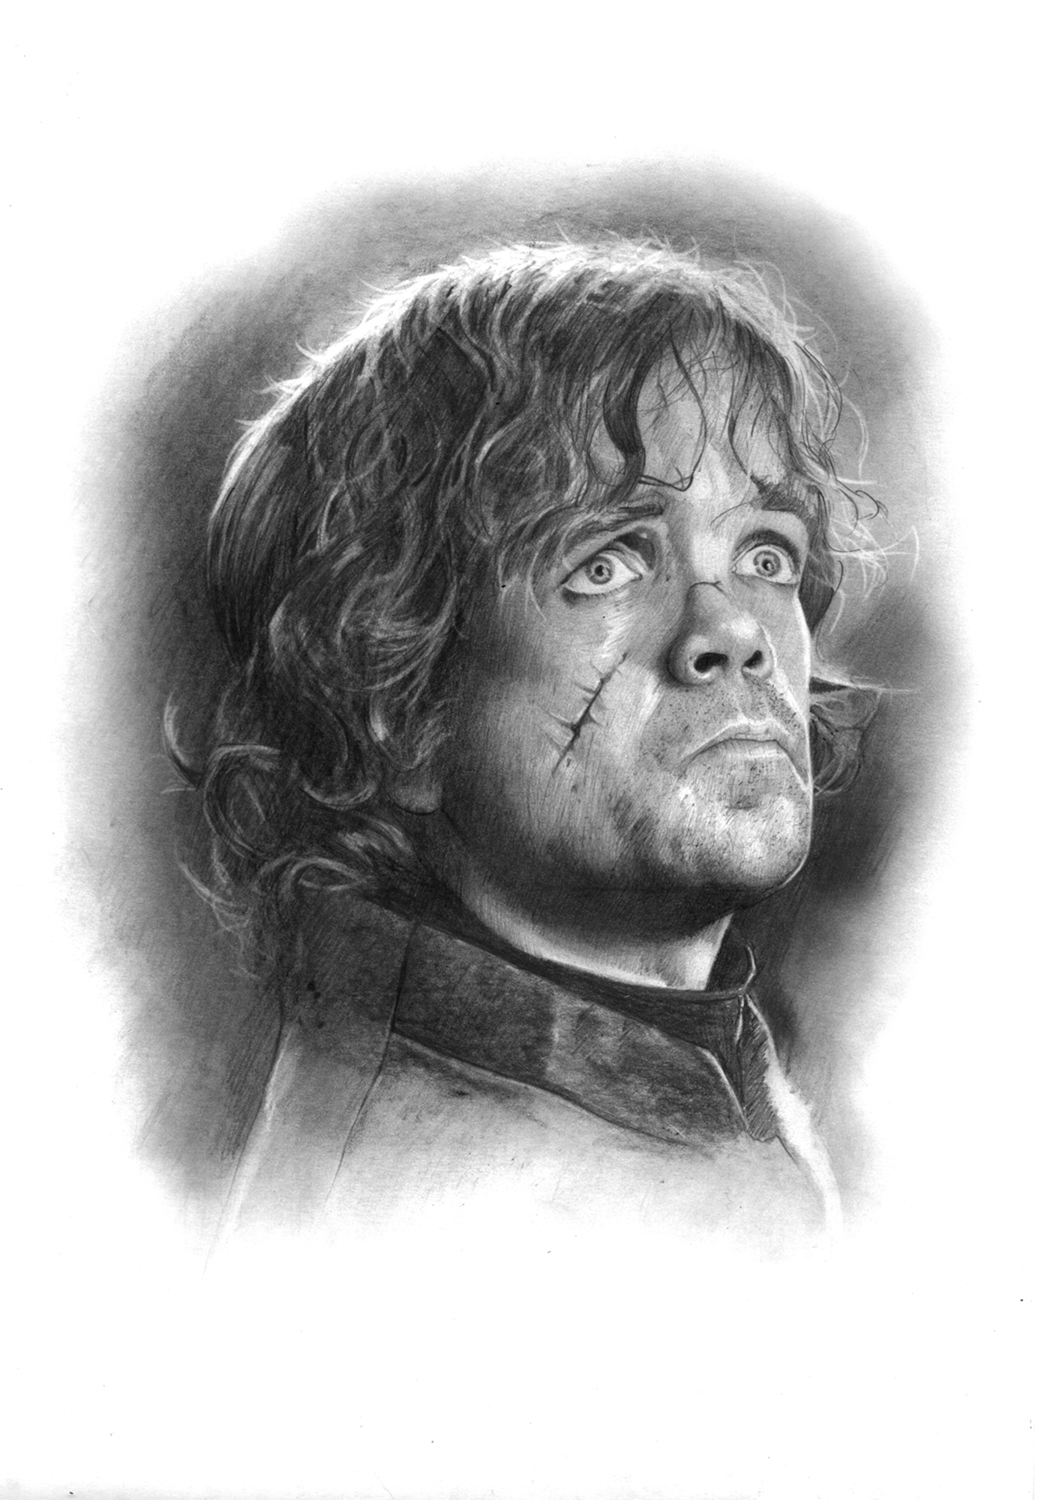 portrait Black&white tyrion lannister Game of Thrones pencil graphite